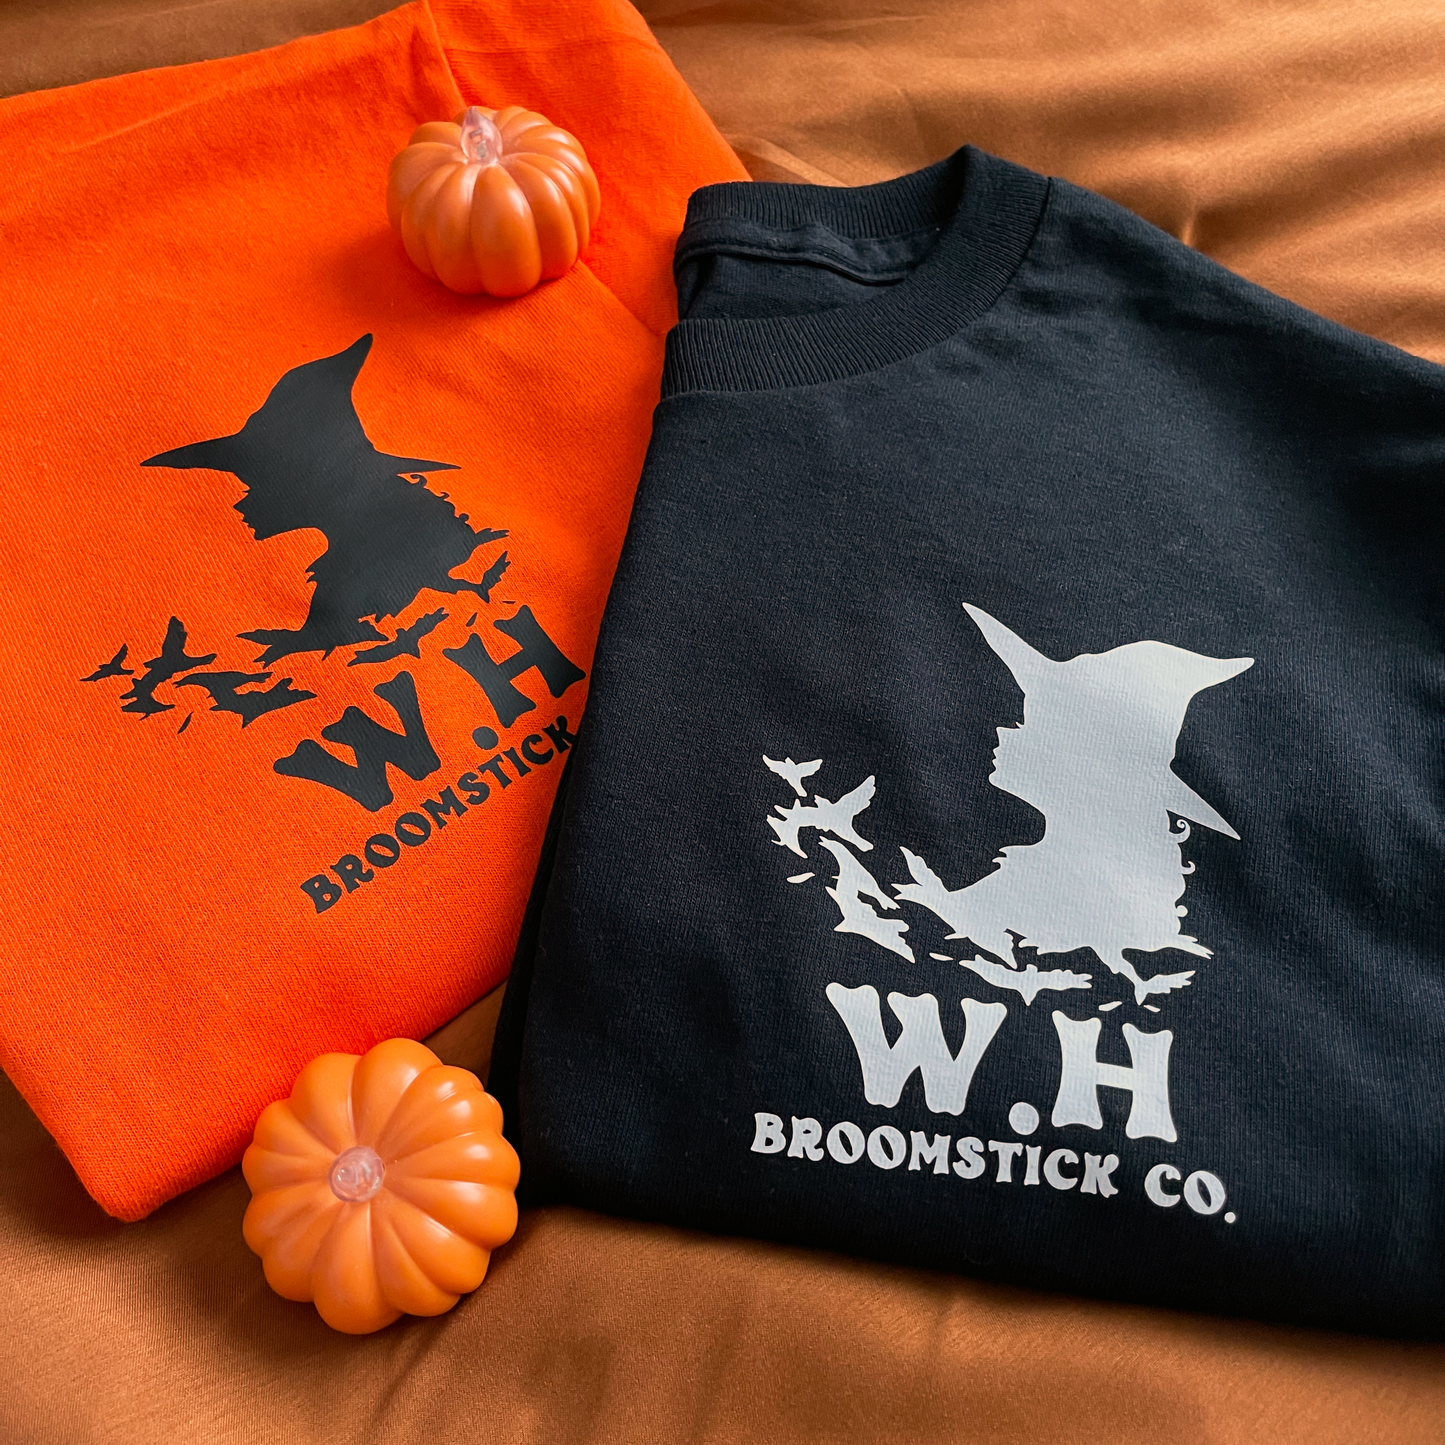 Witching Hour Broomstick Co.: Spooky Orange Halloween Witches Broom Unisex Cotton T-Shirt